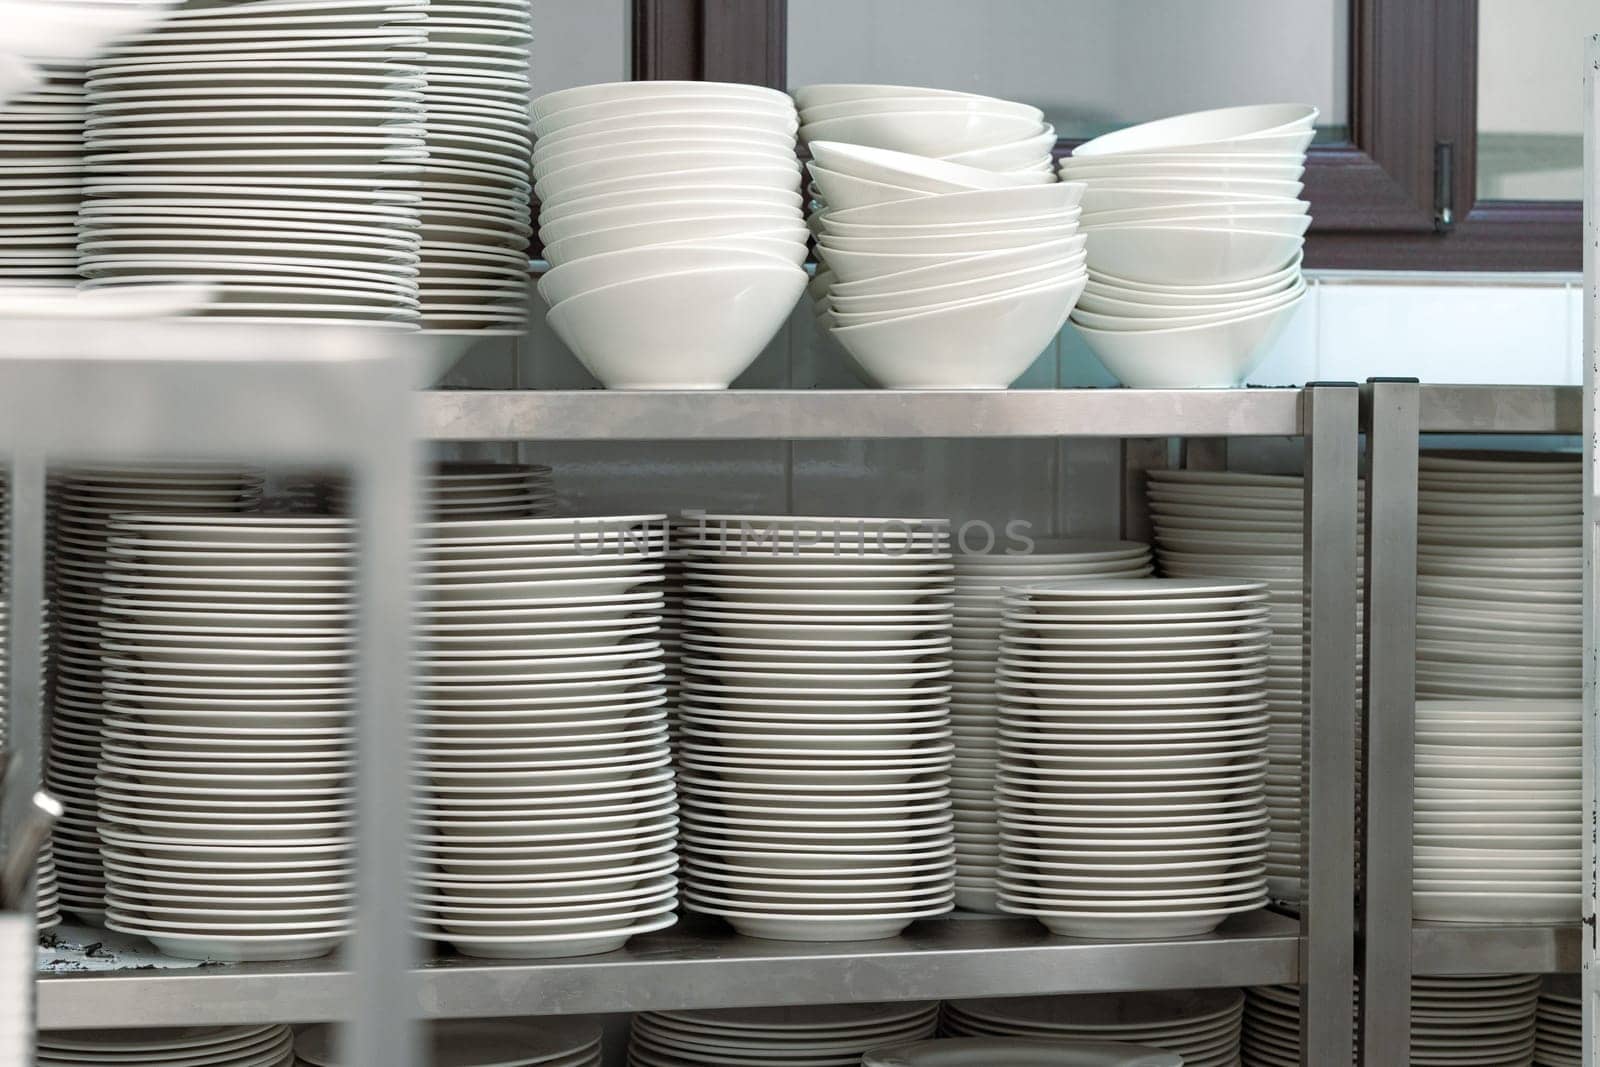 Plenty of stacked plates in the kitchen cupboard close up